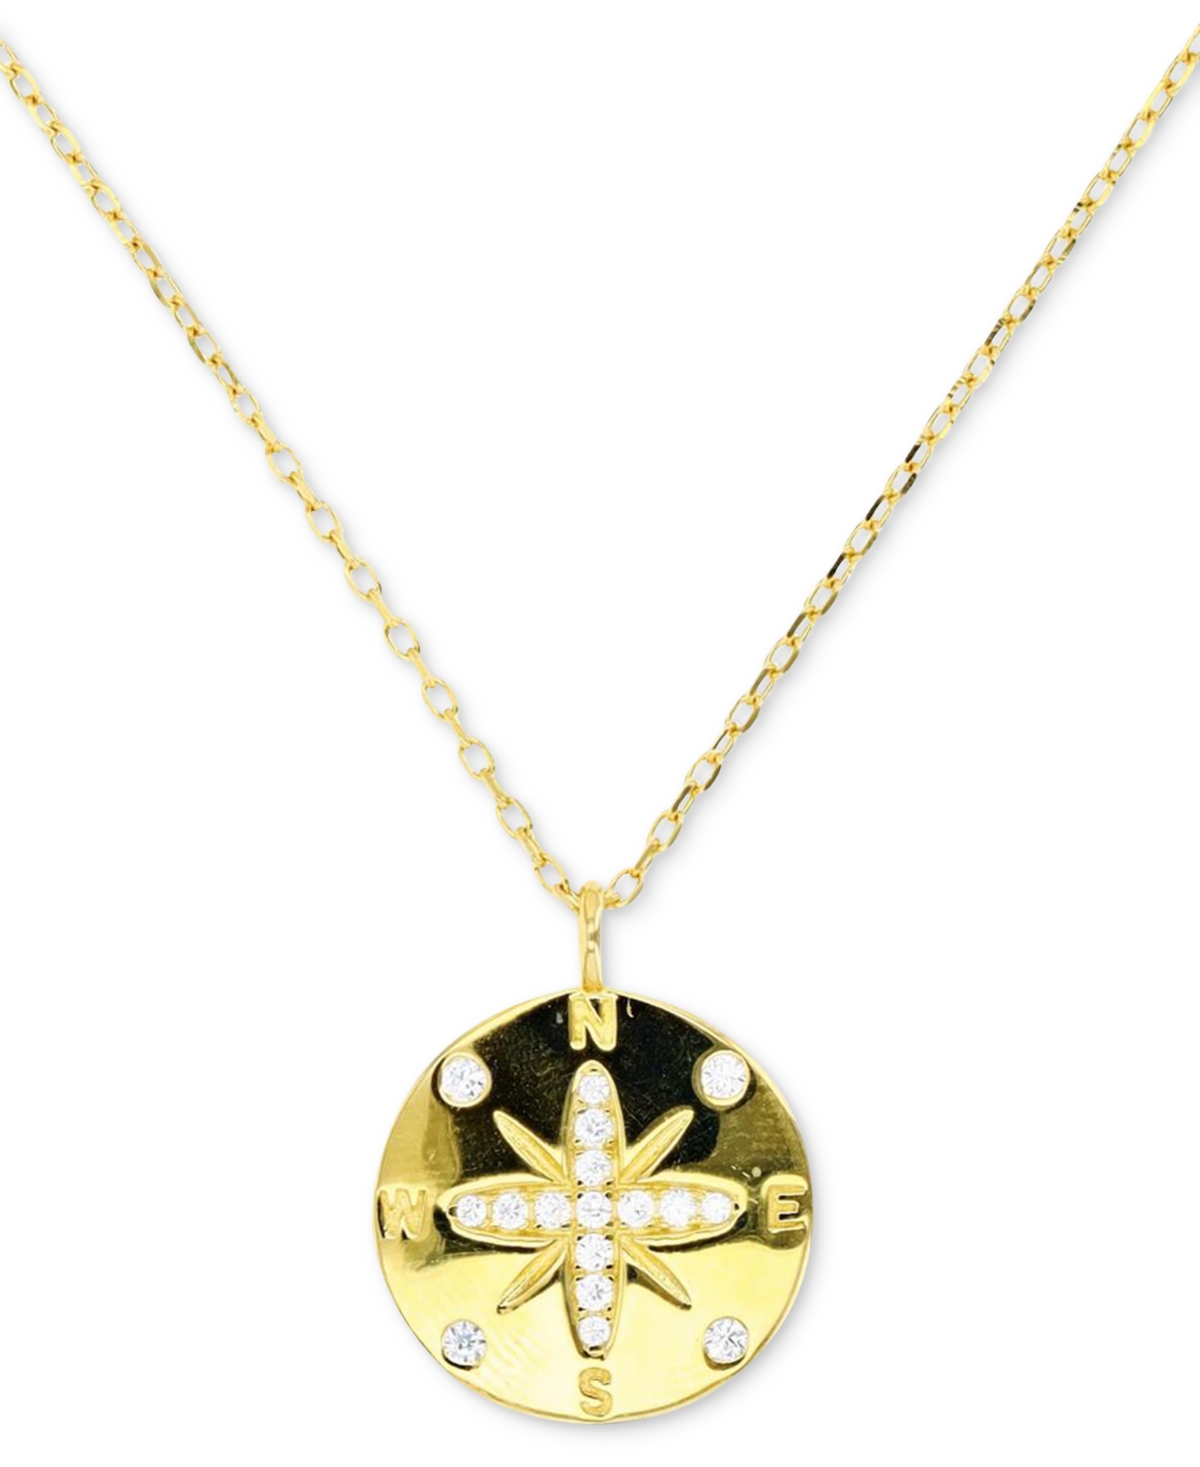 Cubic Zirconia Sand Dollar Pendant Necklace in 14k Gold-Plated Sterling Silver, 18" +2" extender - Gold